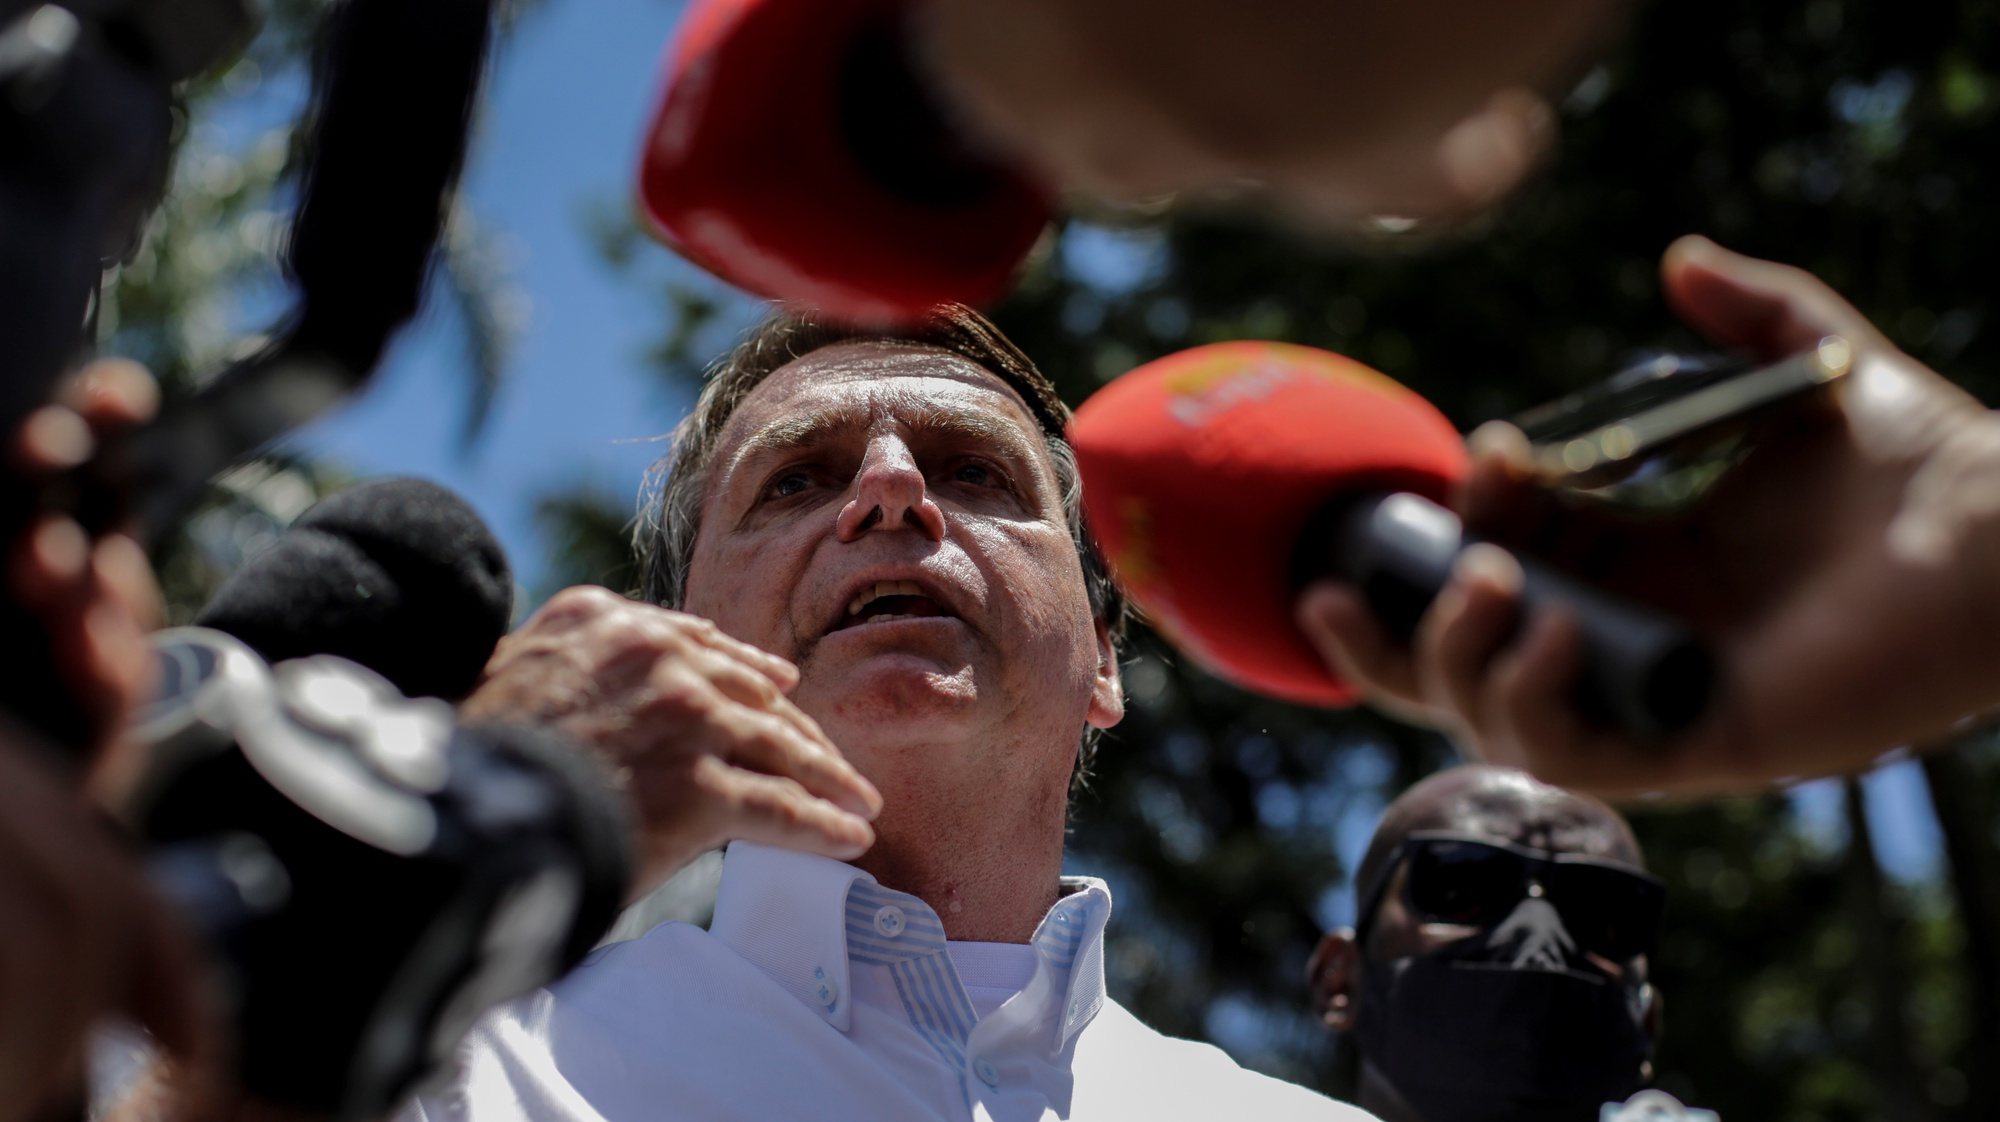 epa08851519 Brazilian President Jair Bolsonaro makes a statement after voting during the second round of Municipal elections at a polling station in Rio de Janeiro, Brazil, 29 November 2020. Brazil is holding the second round of municipal elections in the country on 29 November.  EPA/ANTONIO LACERDA